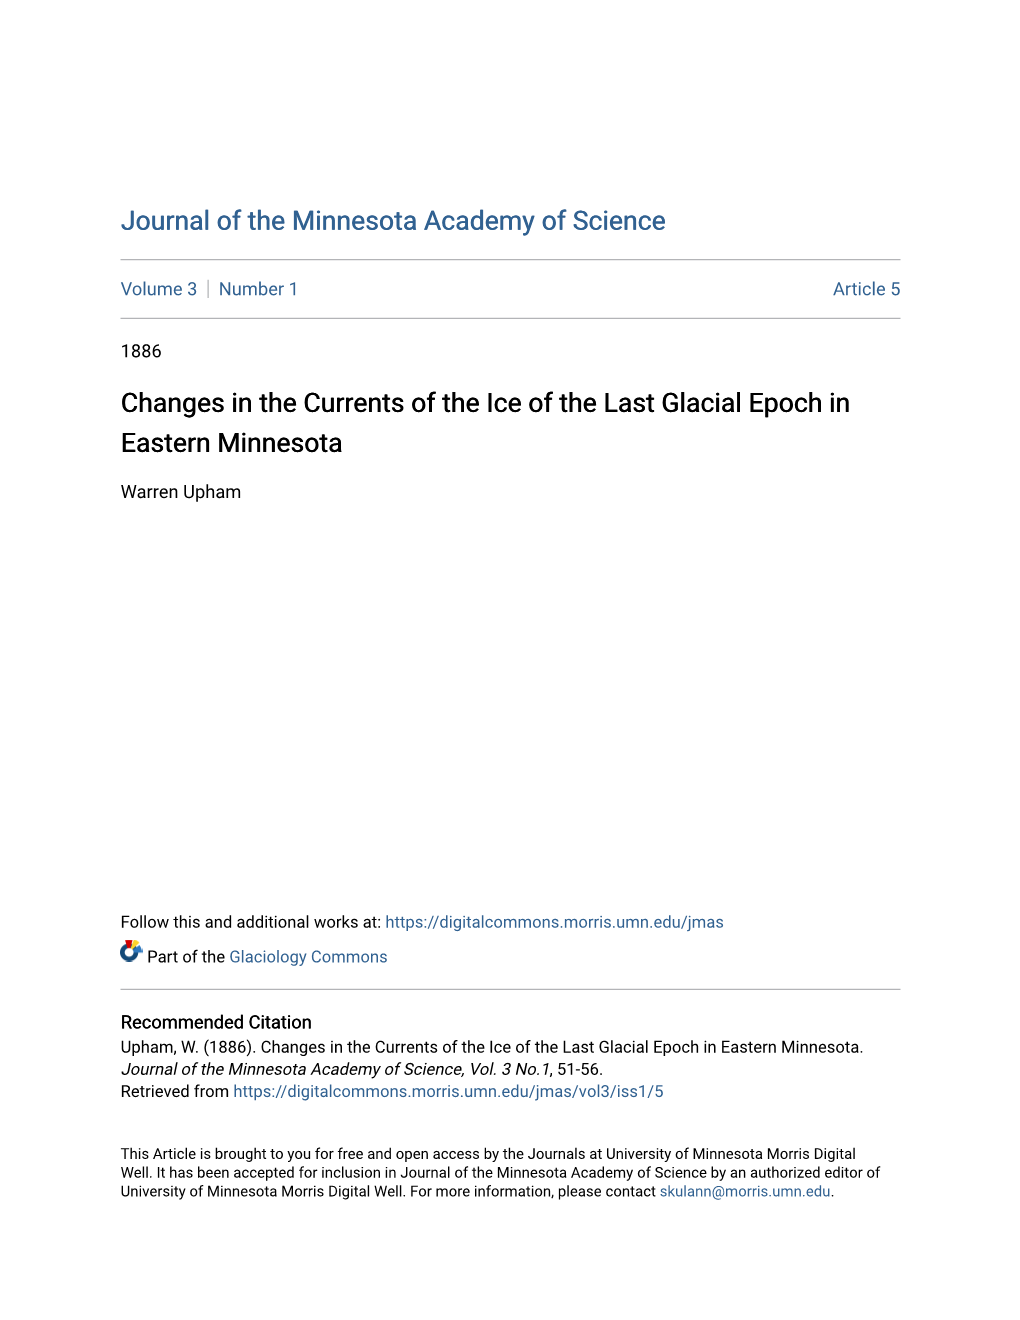 Changes in the Currents of the Ice of the Last Glacial Epoch in Eastern Minnesota